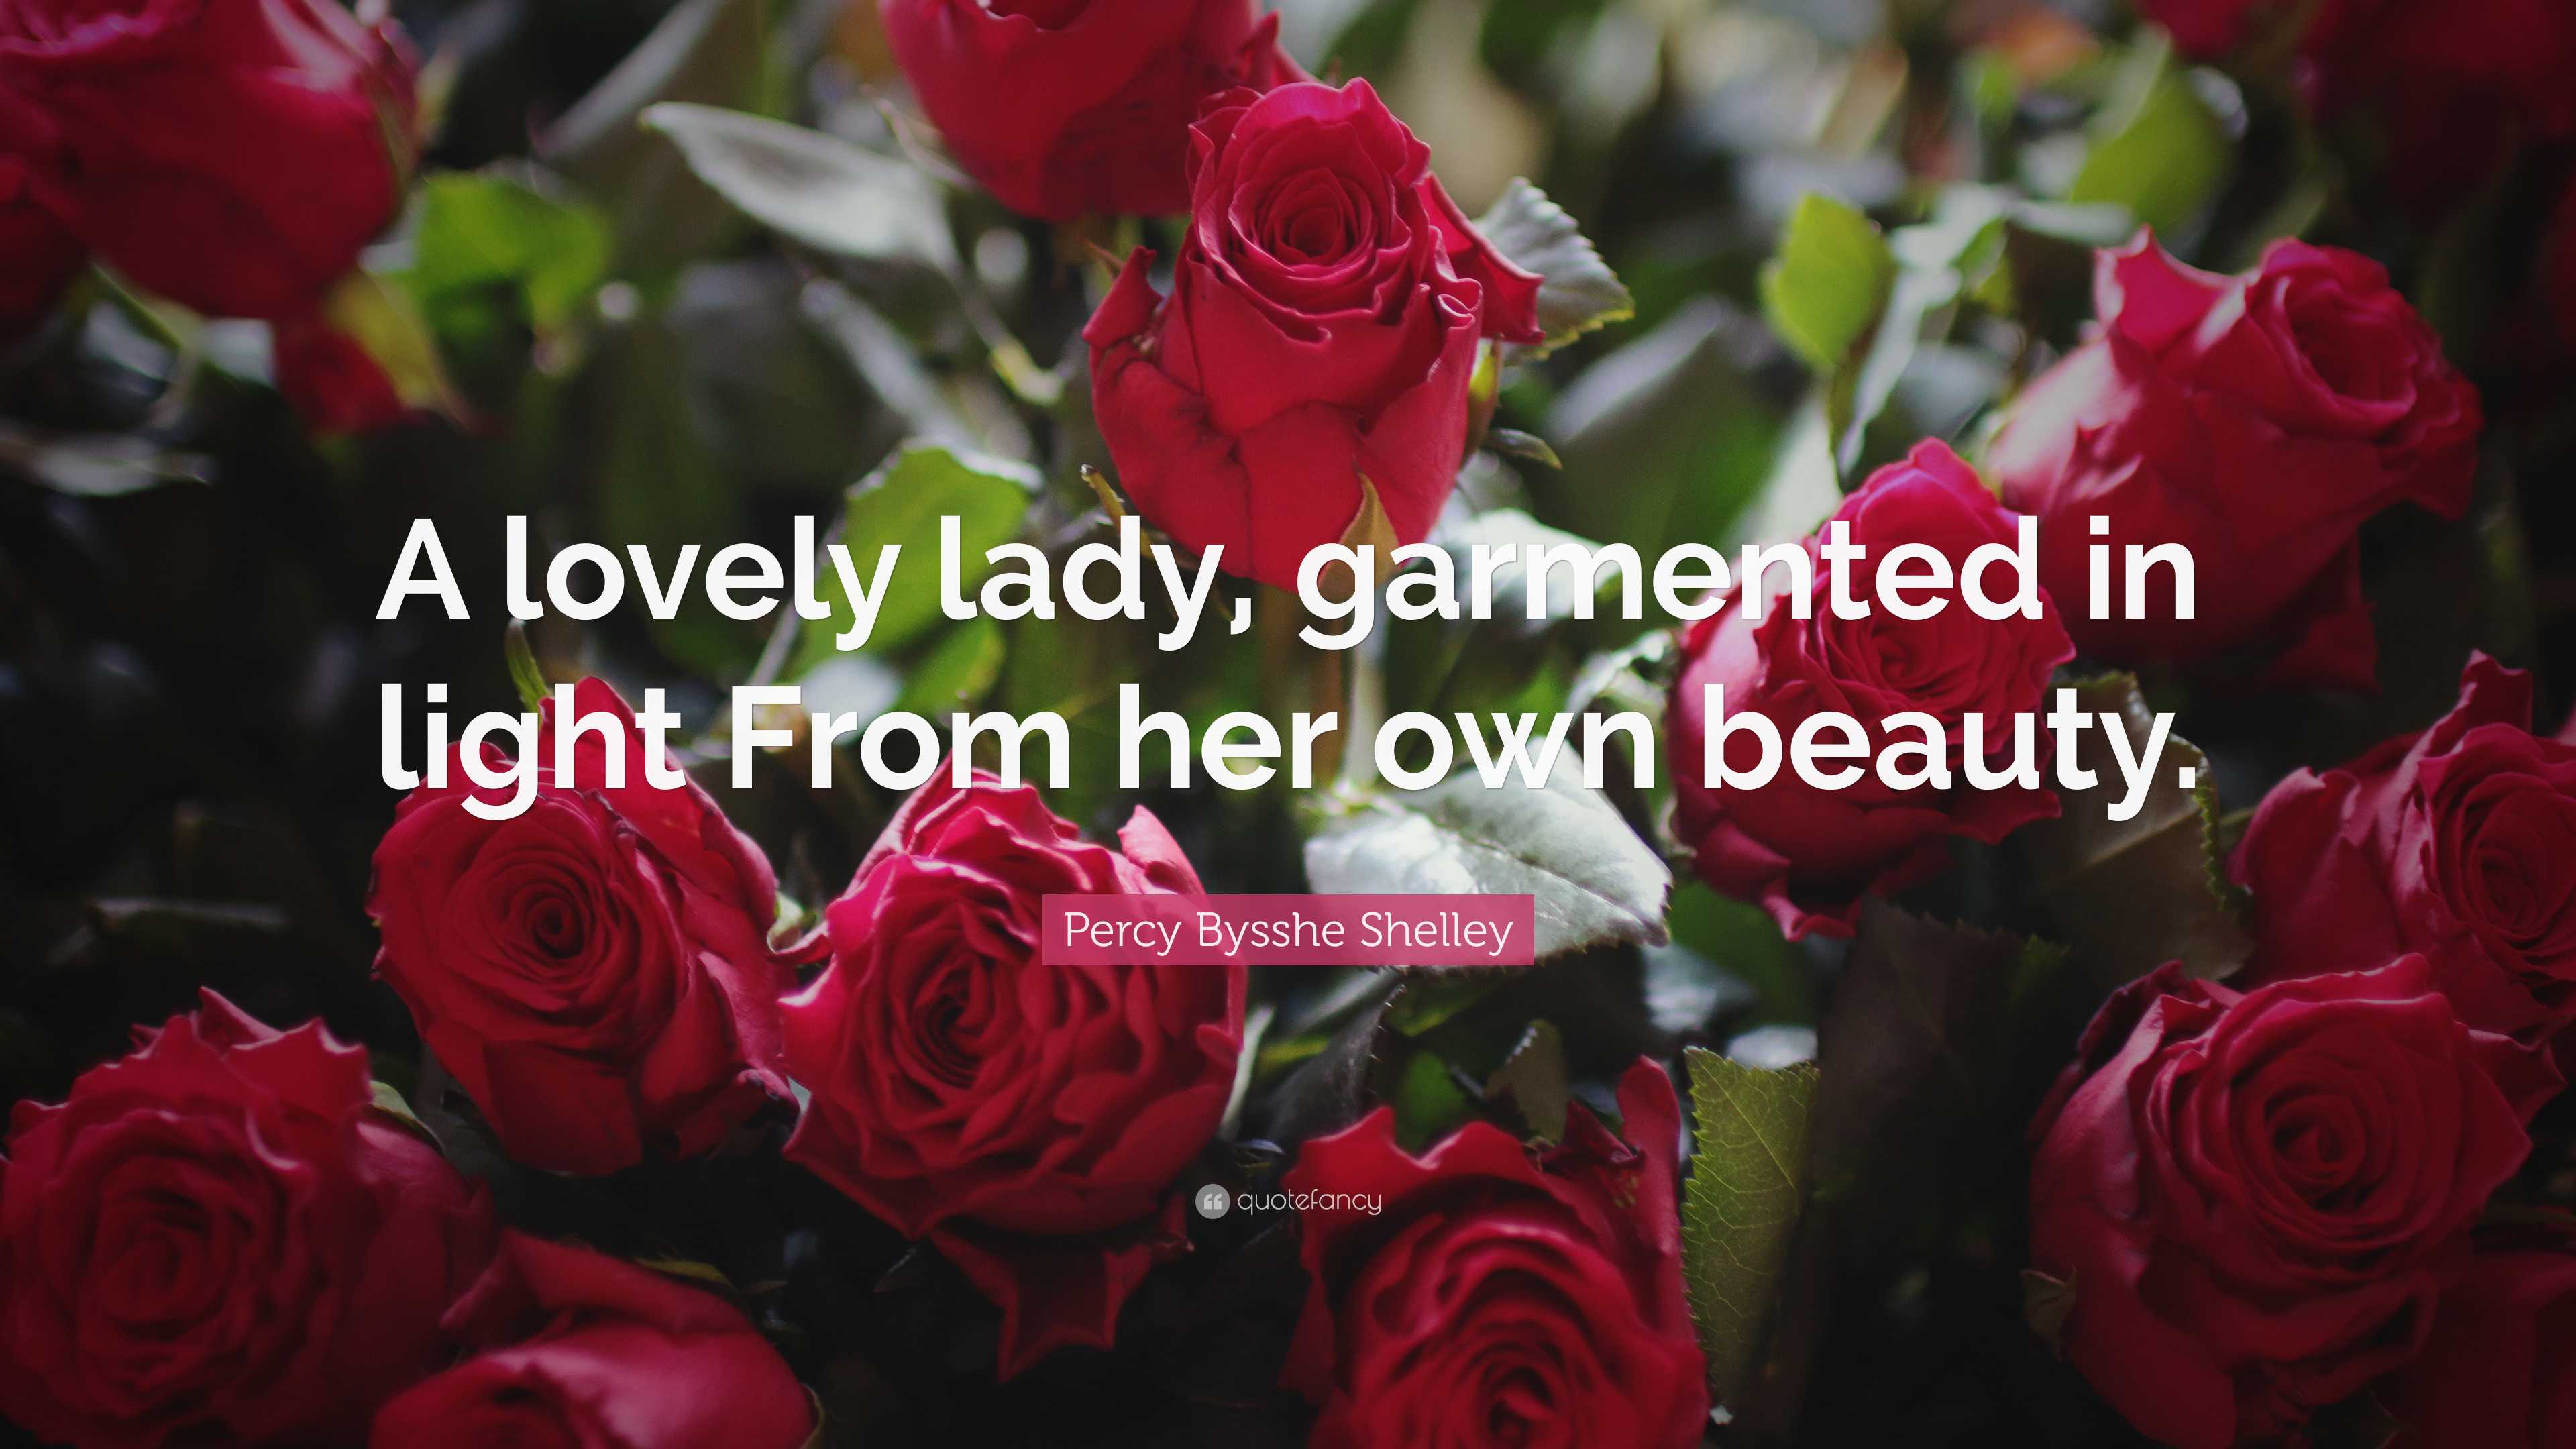 Percy Bysshe Shelley Quote: “A lovely lady, garmented in light From her ...